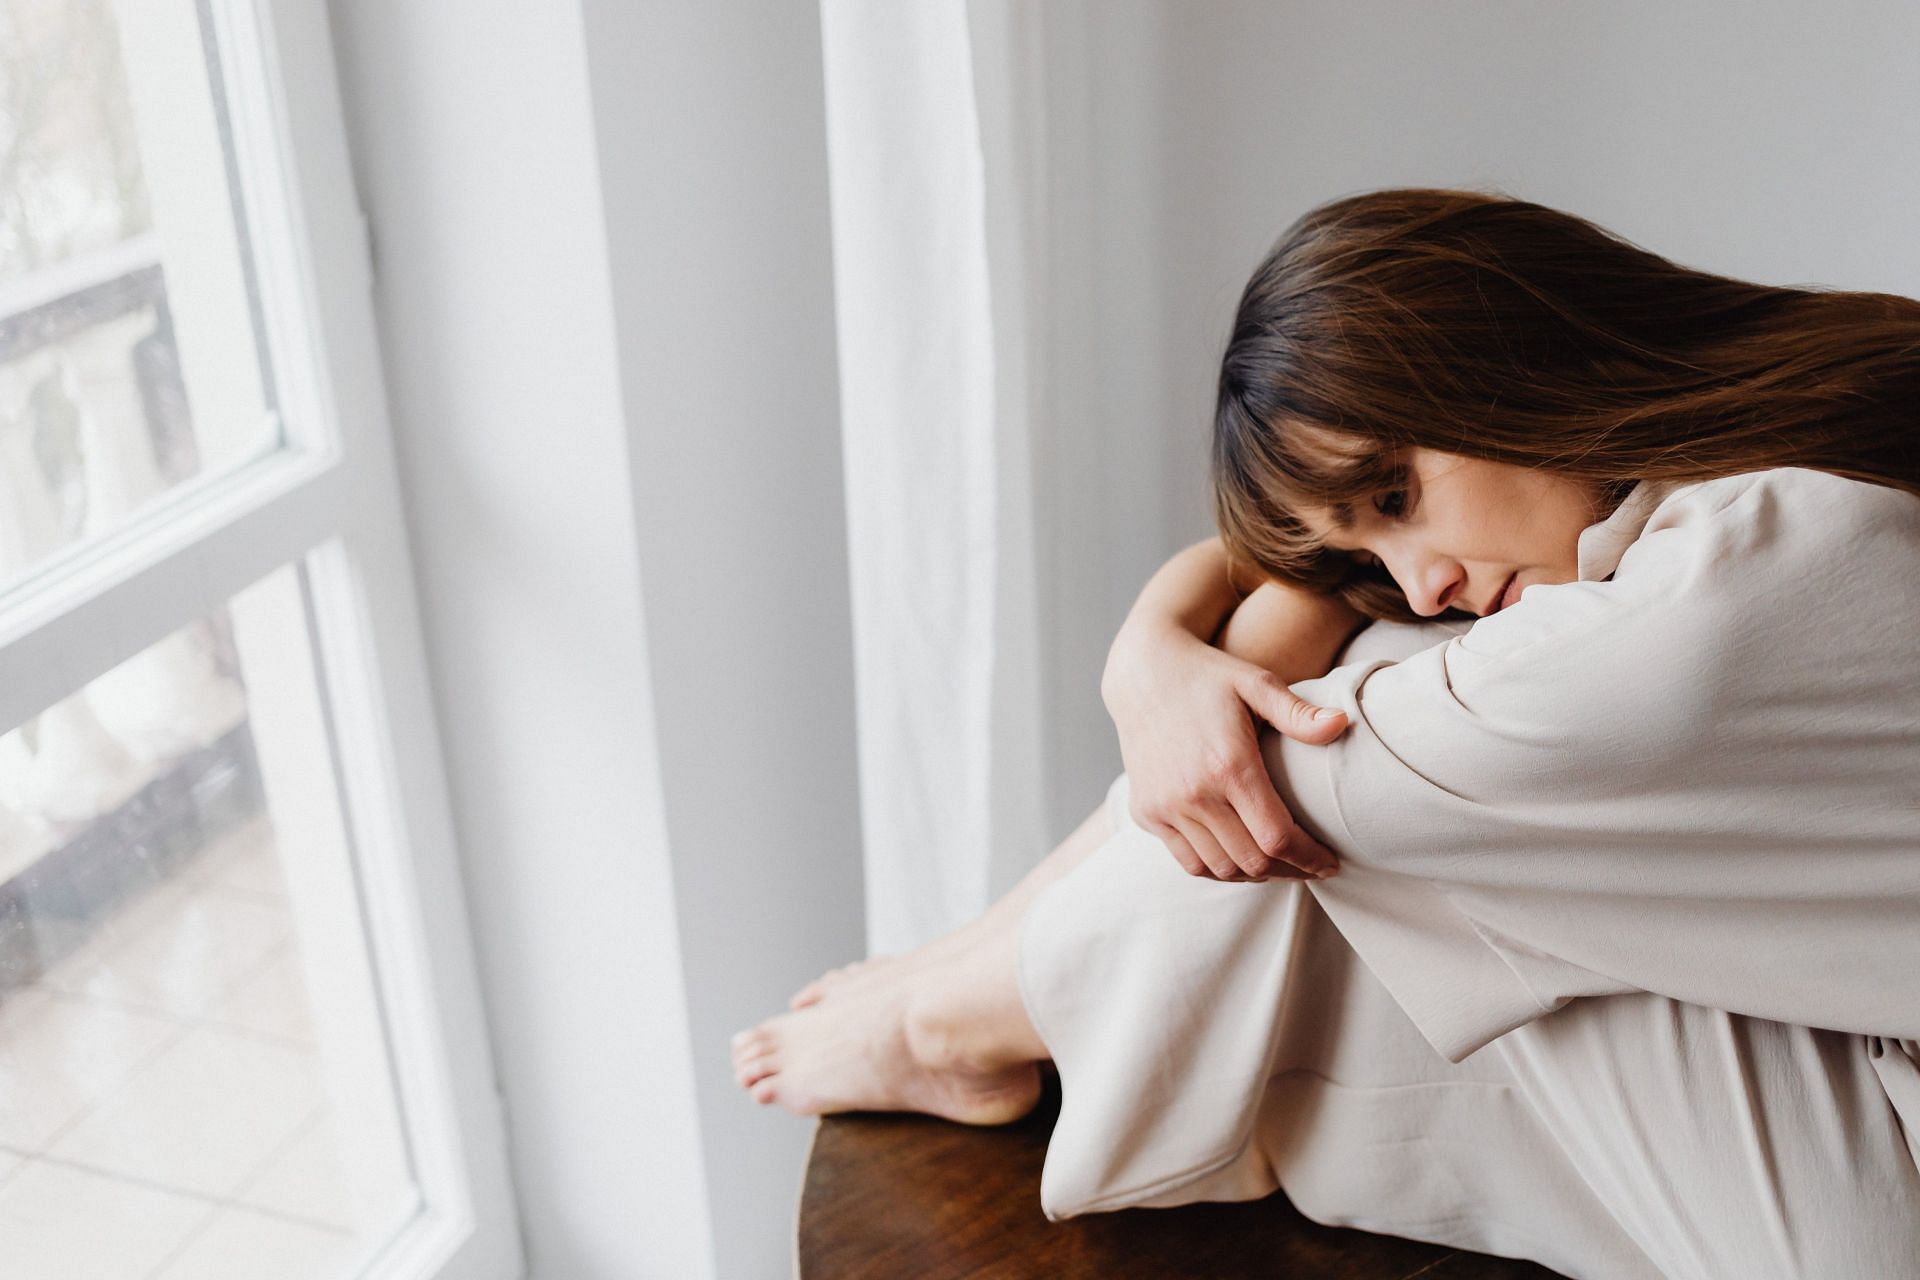 It can feel heavy to live with a depressed spouse. (Image via Pexels/ karolina Grabowska)